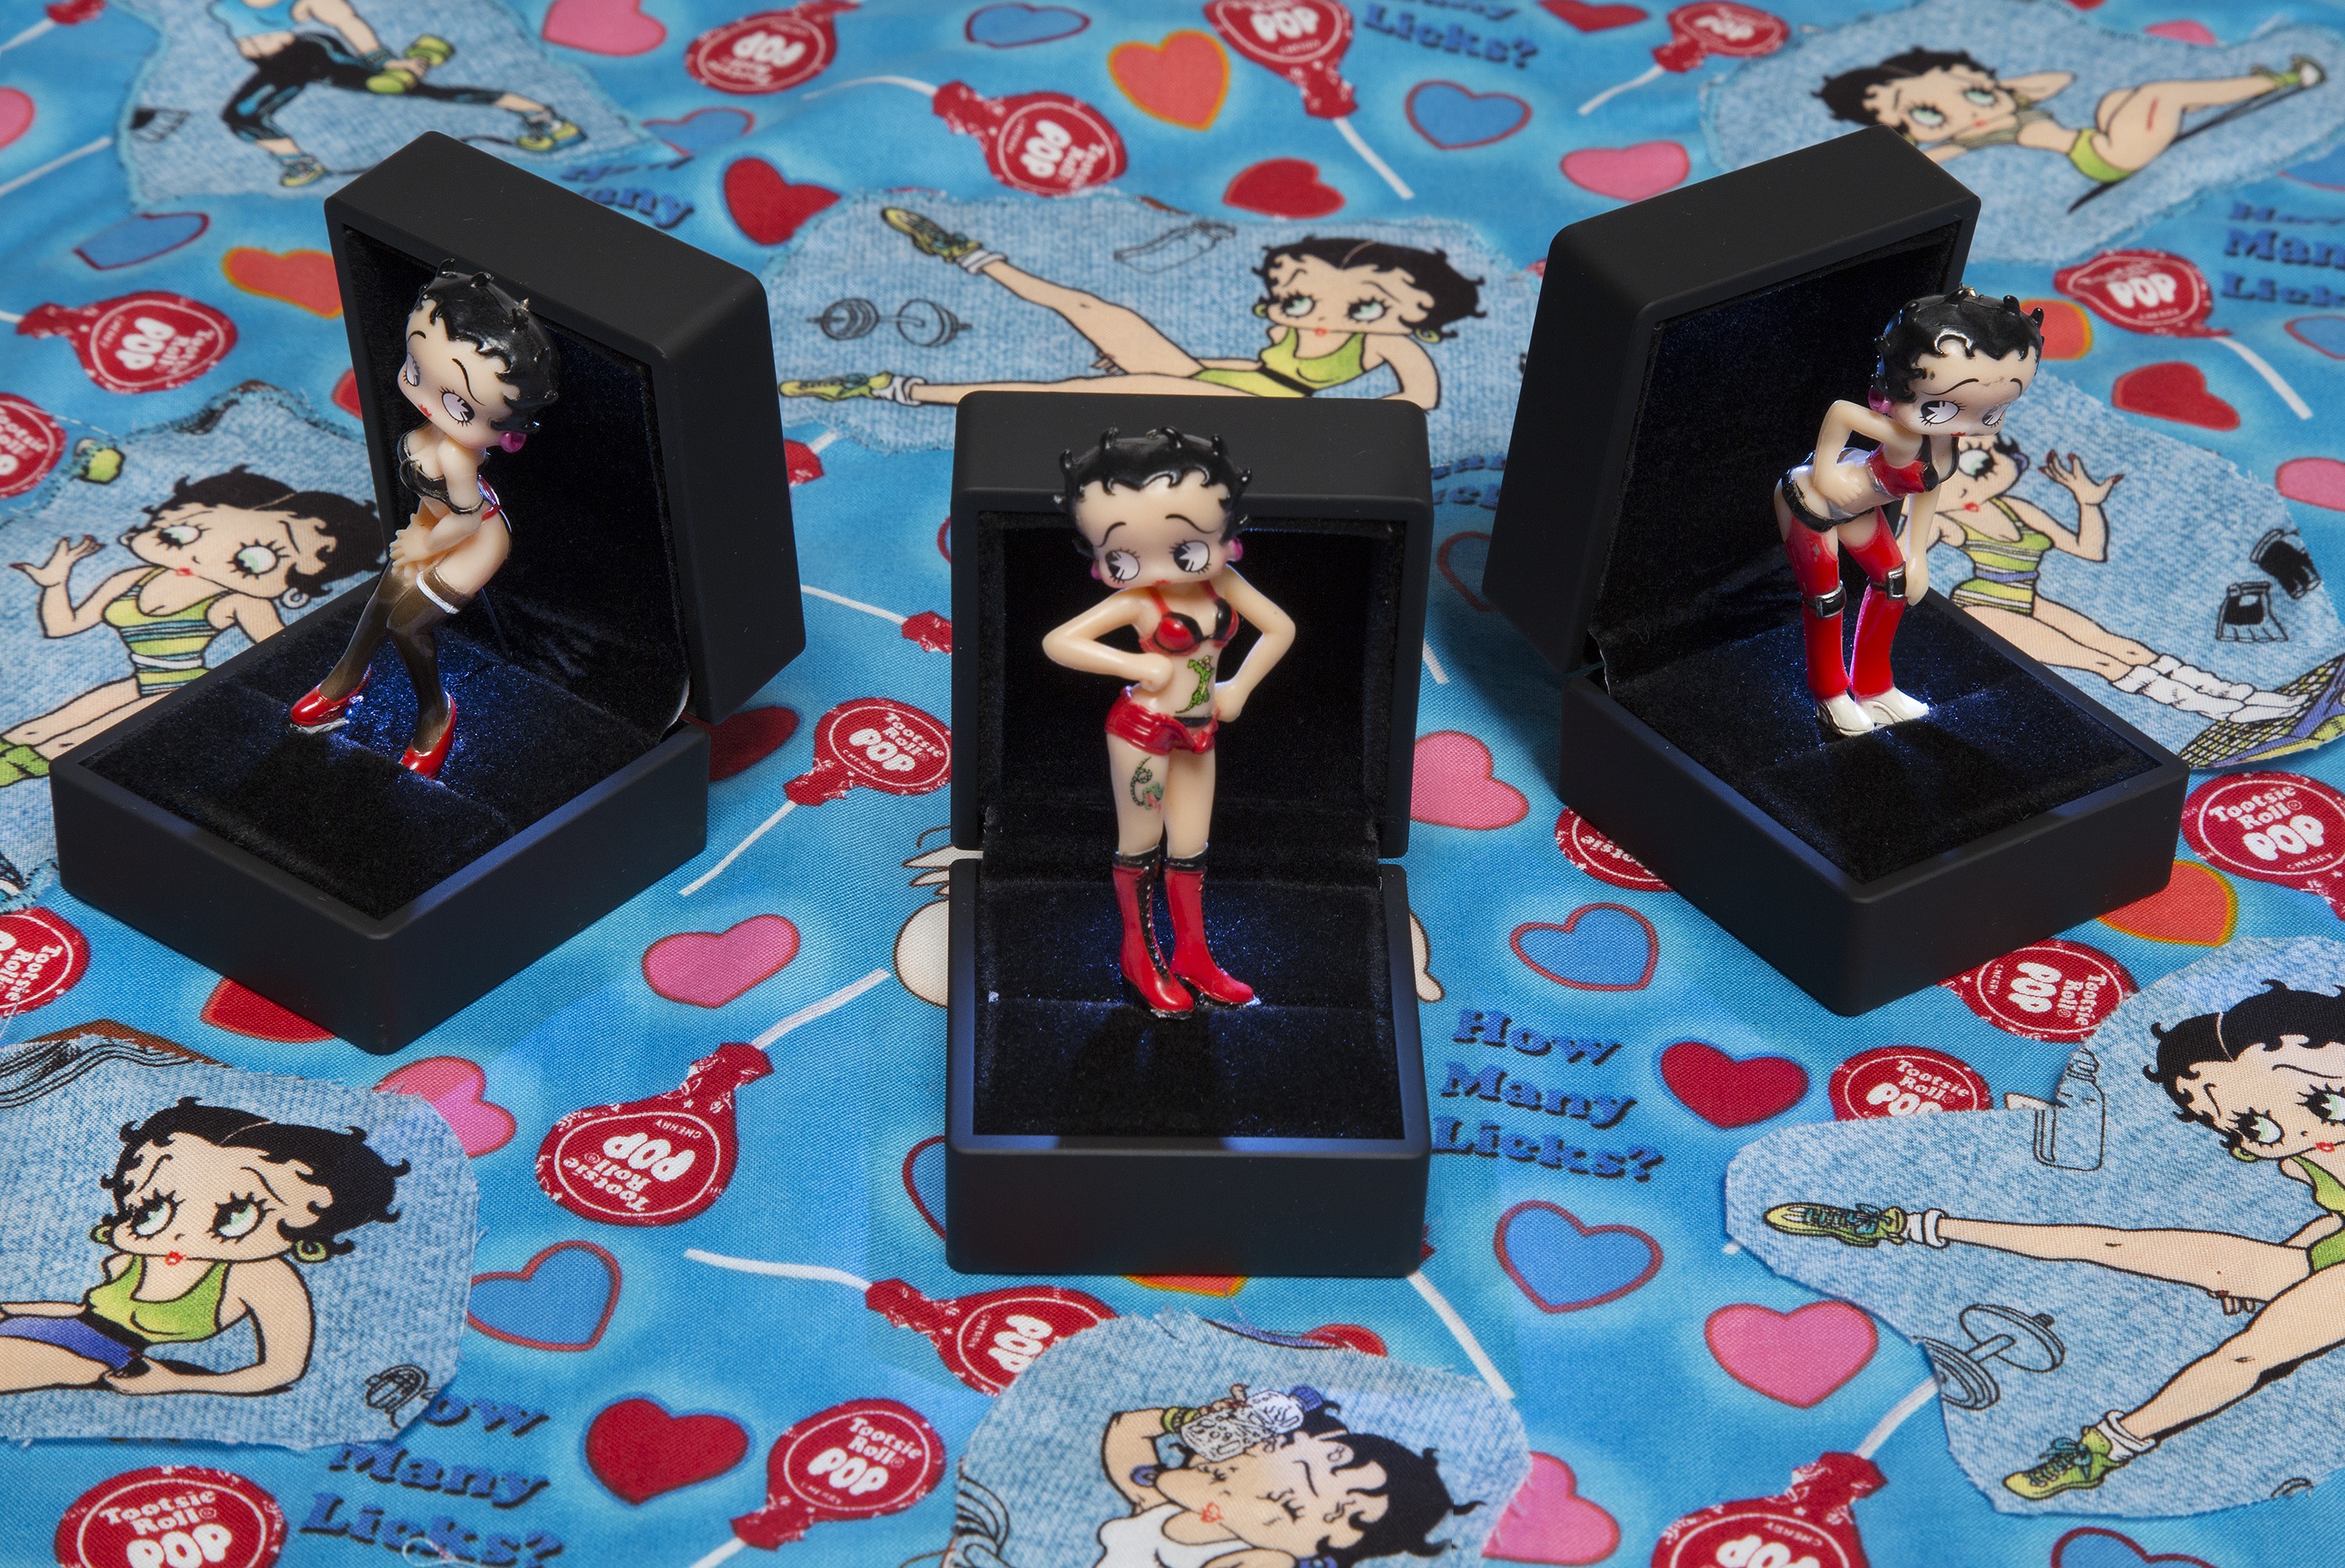 All Medal Betty Boop & Snoopy Art